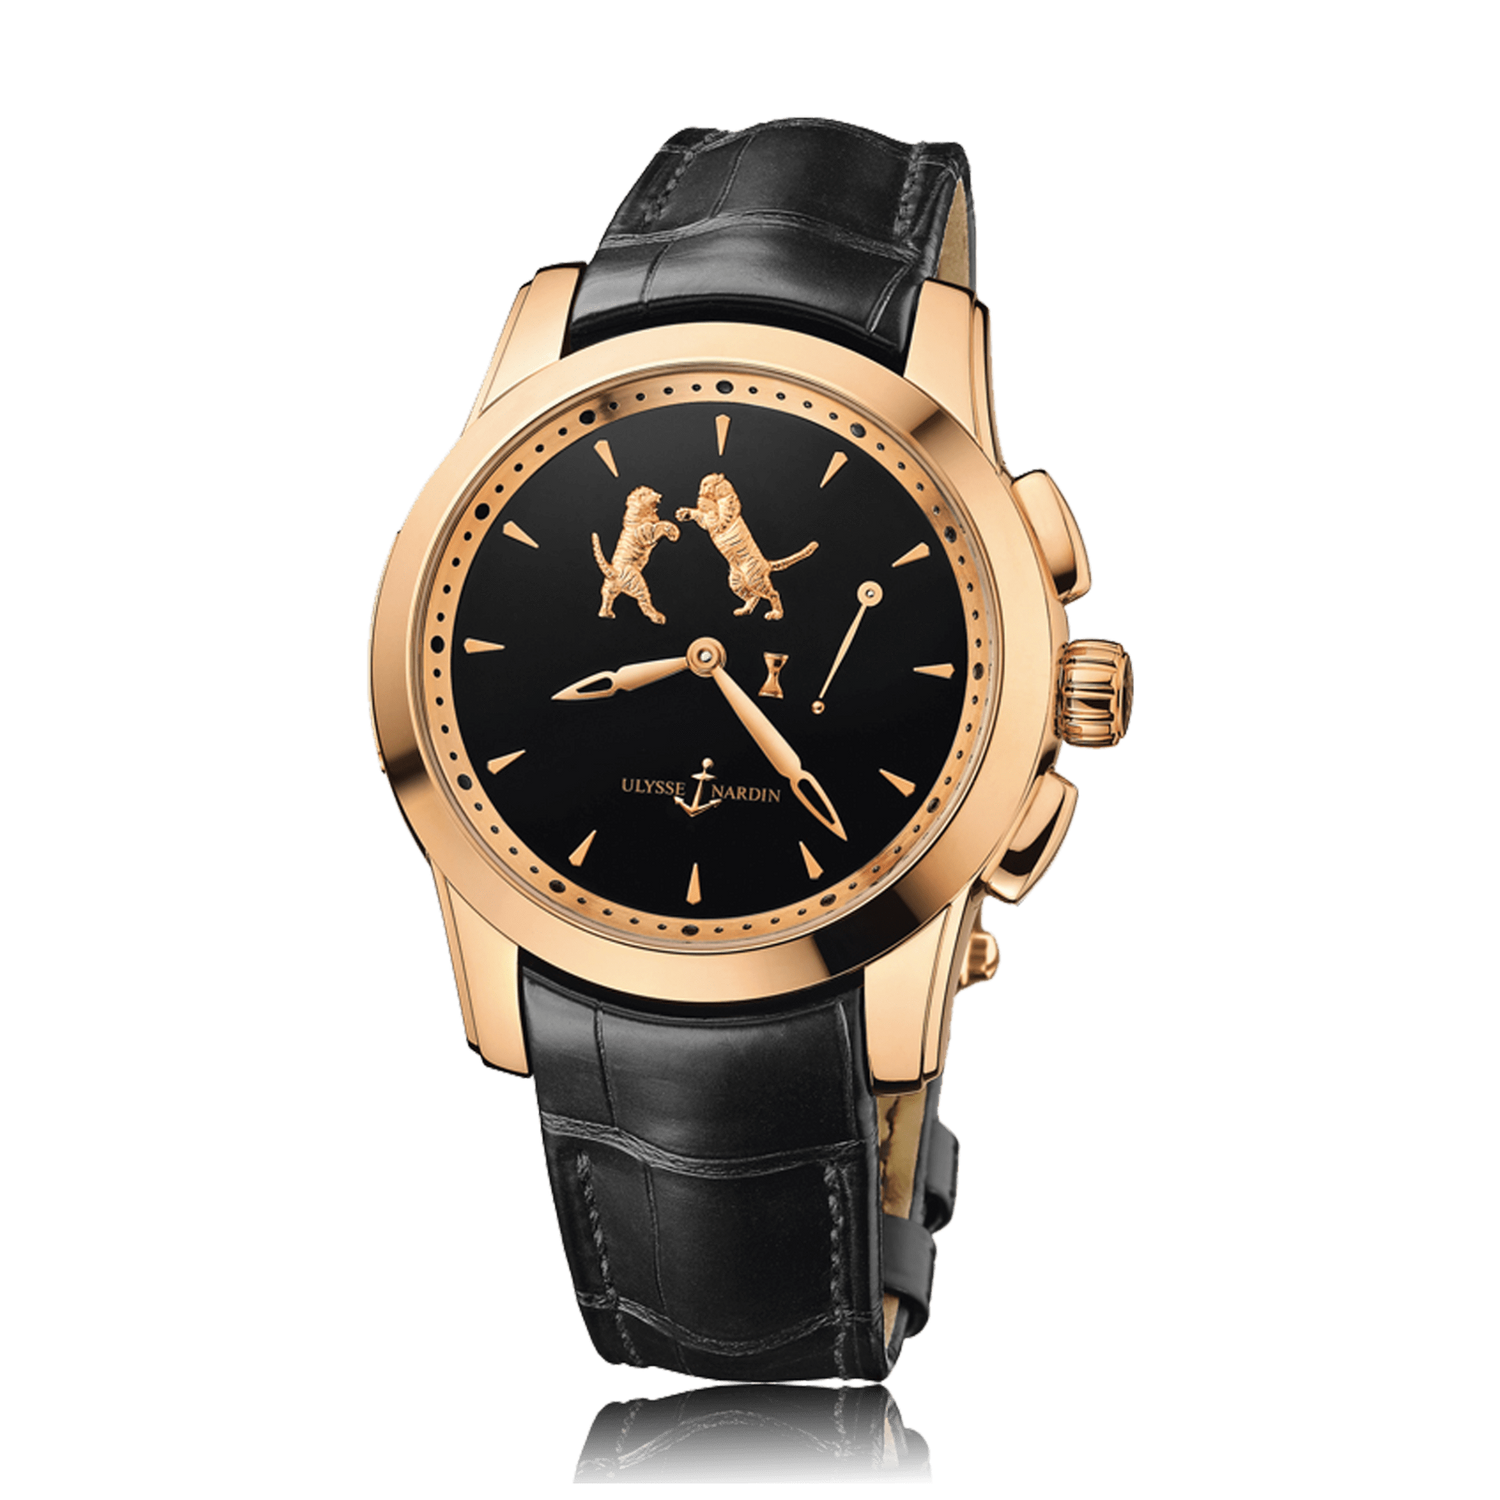 Ulysse Nardin Classico Automatic Rose Gold Black Dial Mens Watch 6106-130/E2-TIGER